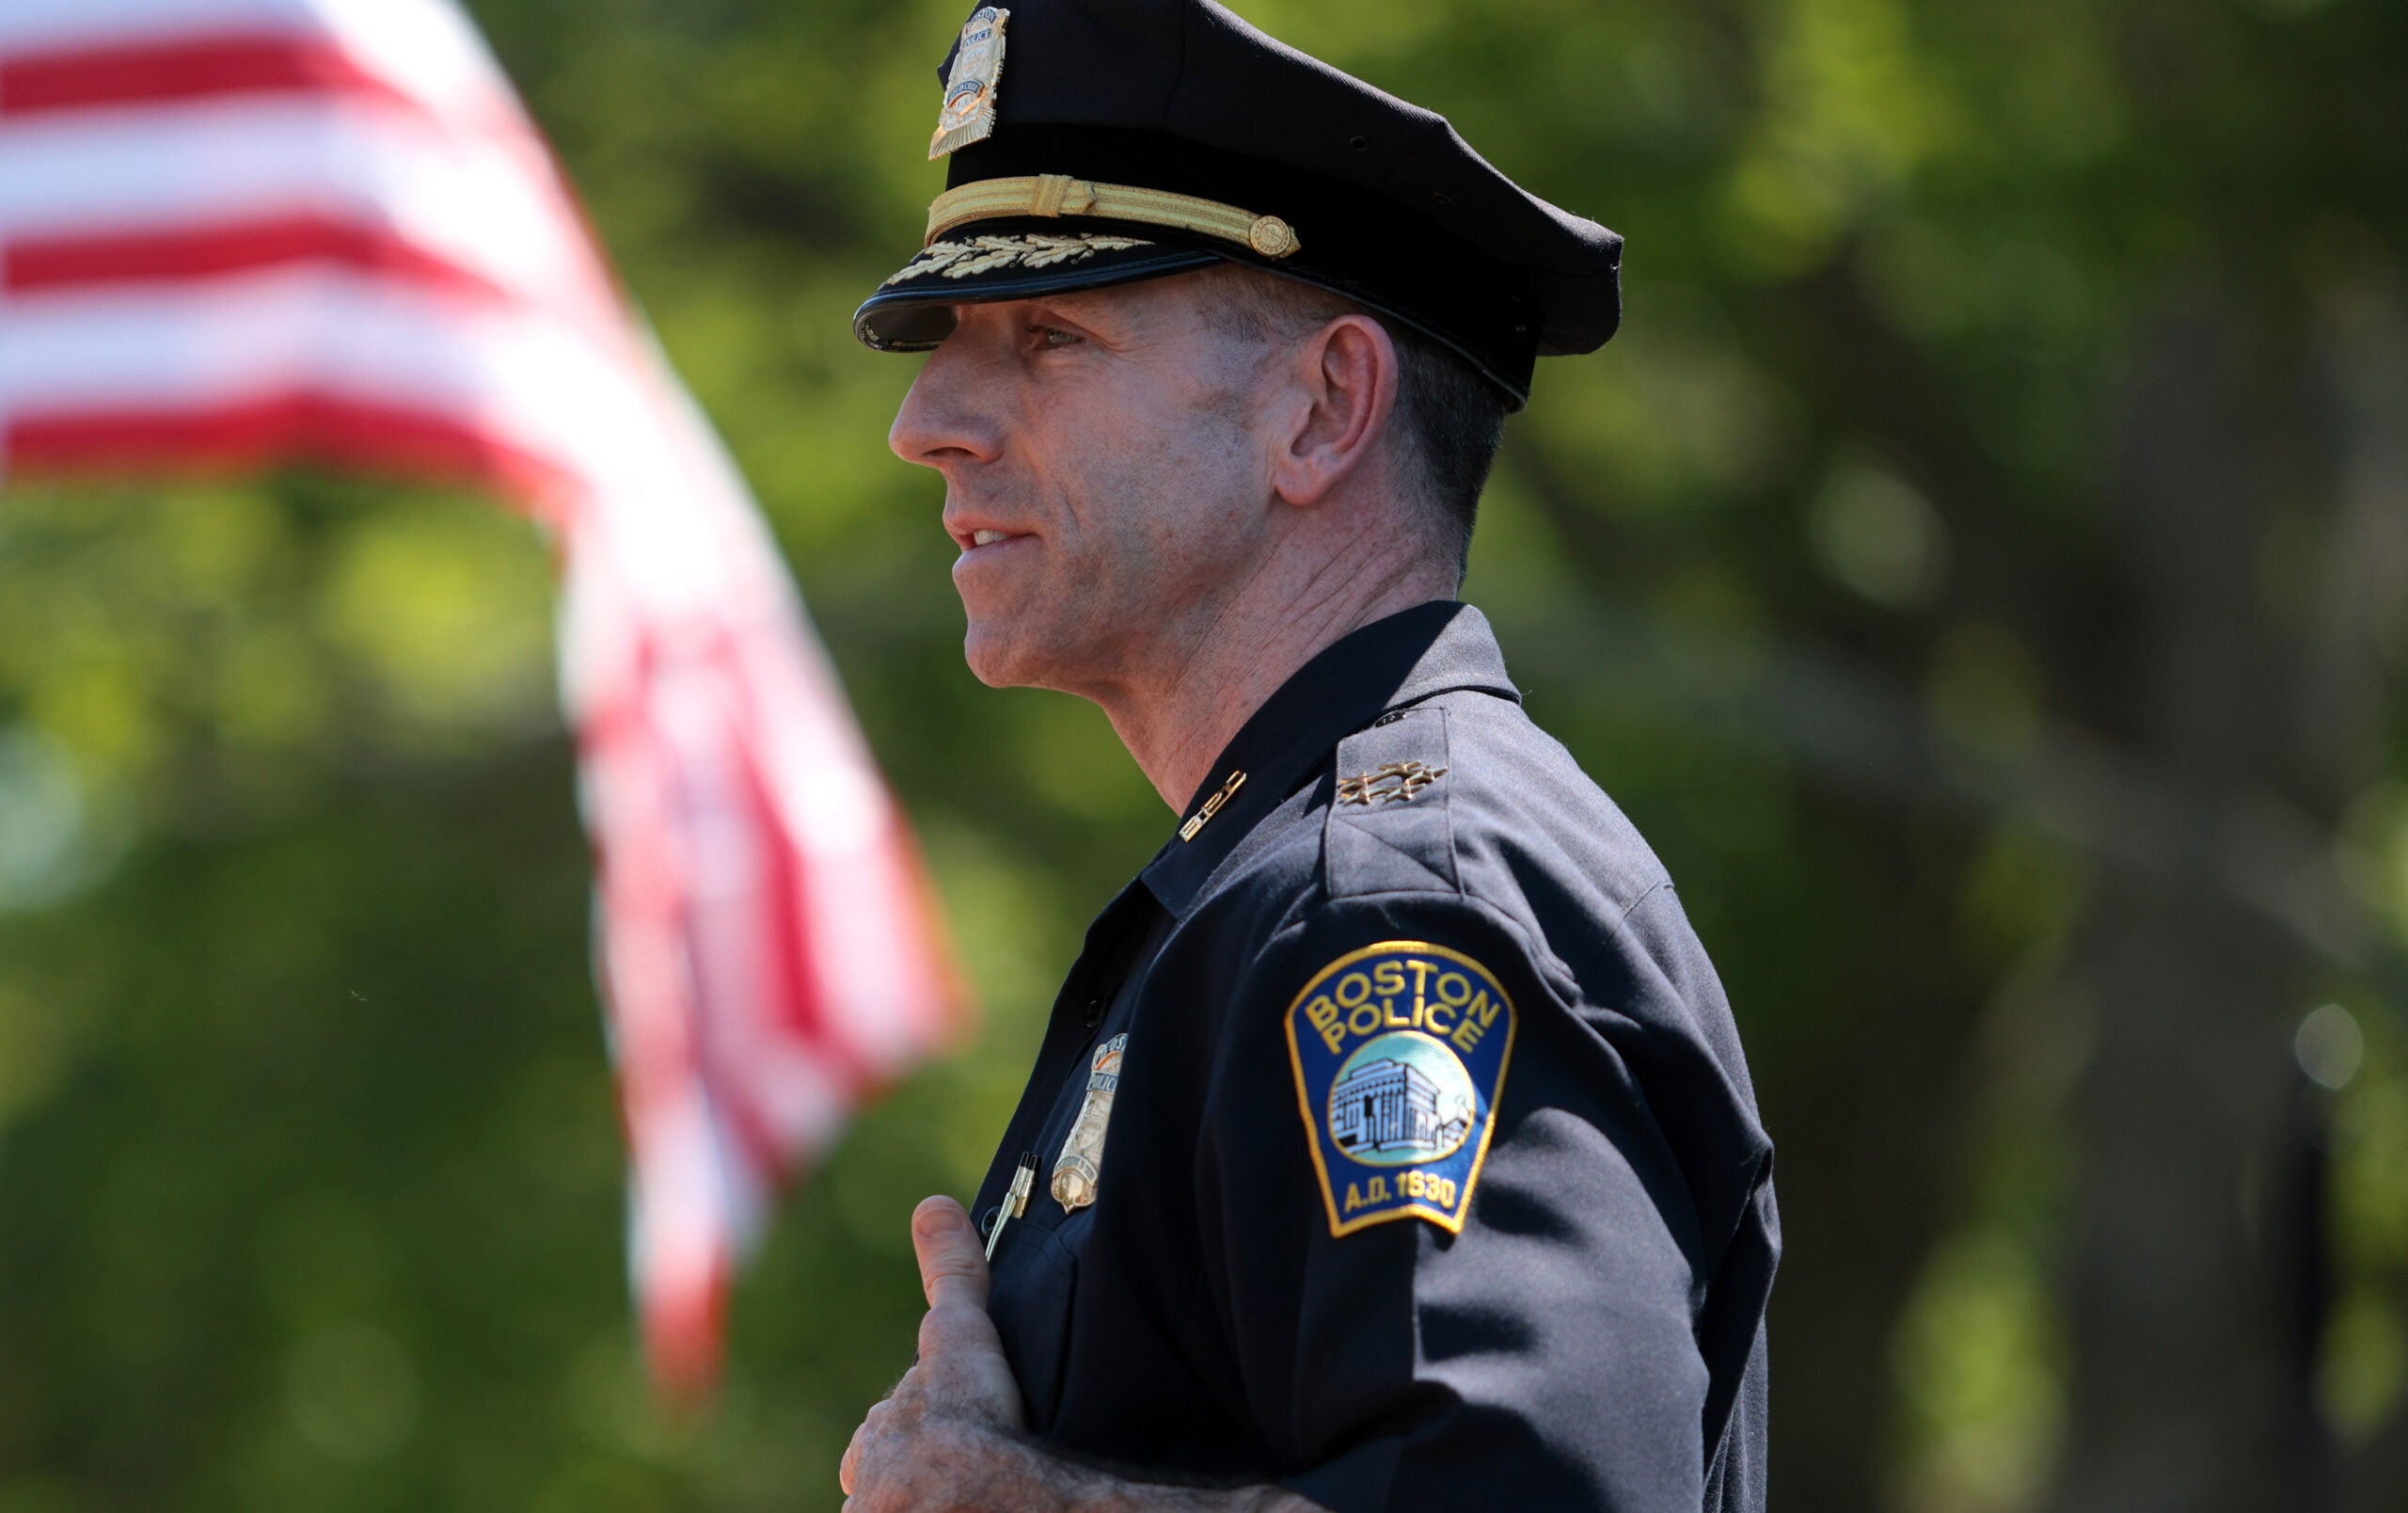 Boston police officers remembered in annual ceremony 2